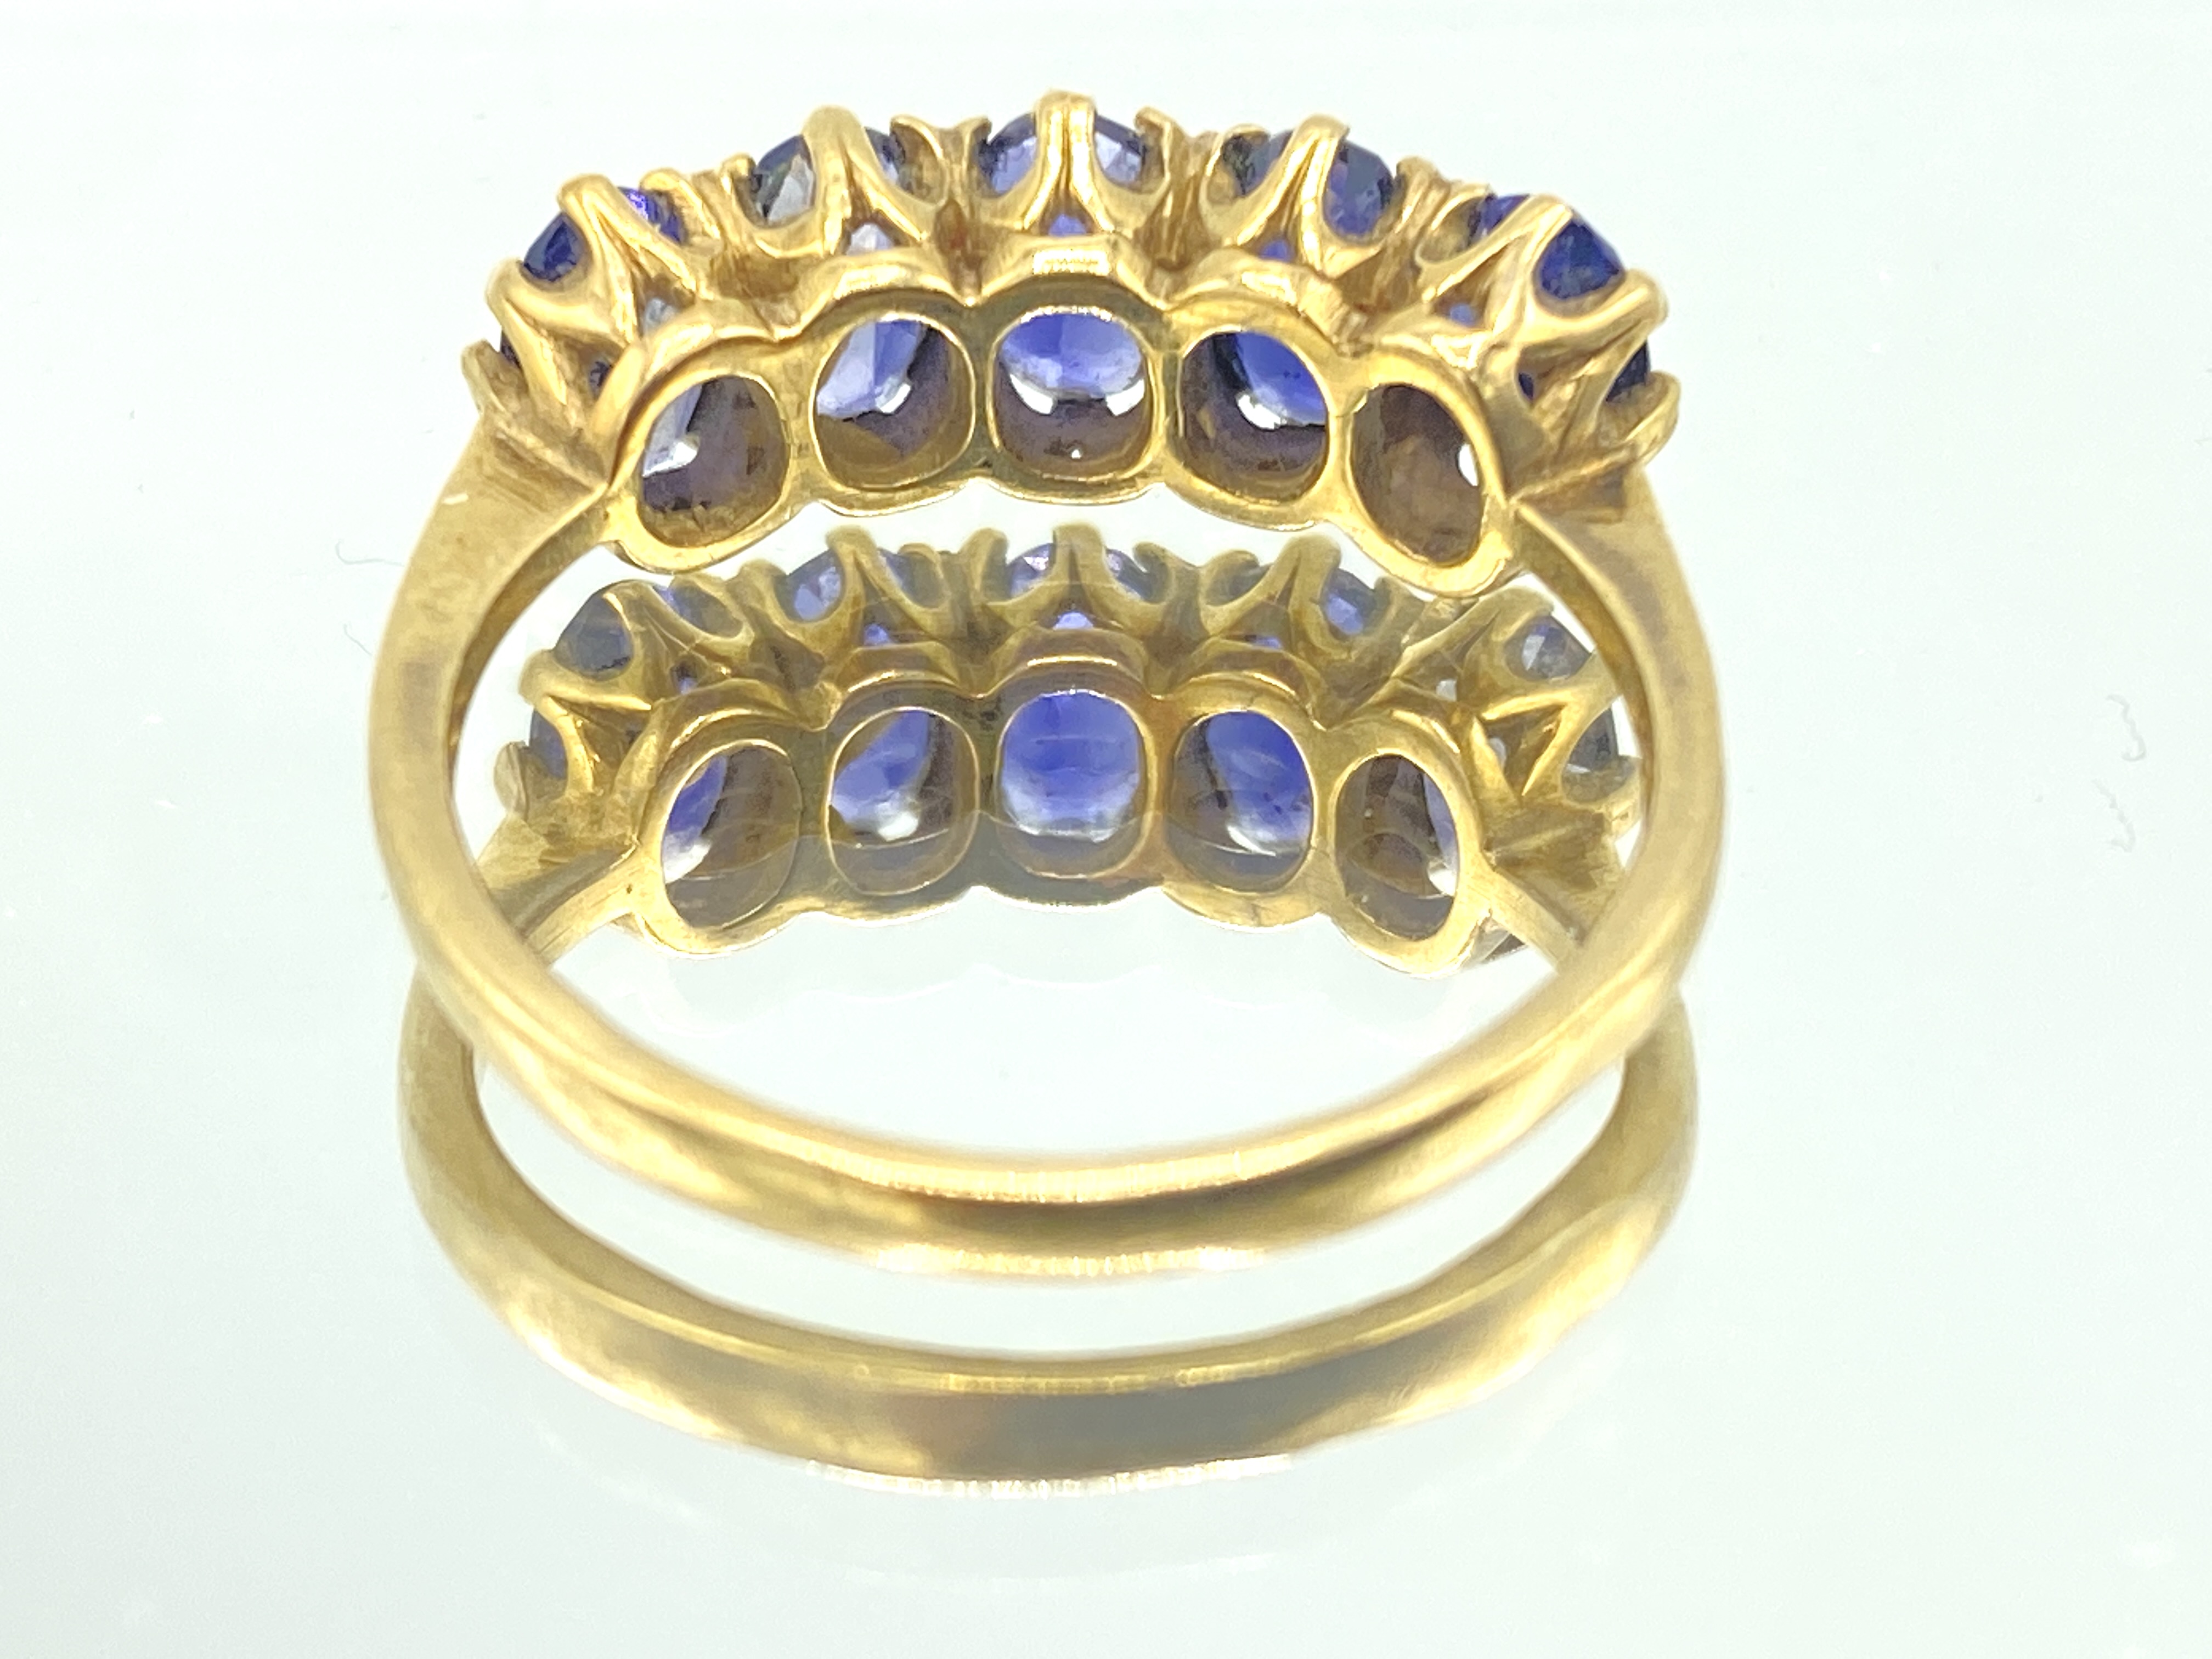 Two 9ct gold and 5 stone rings - Image 4 of 7